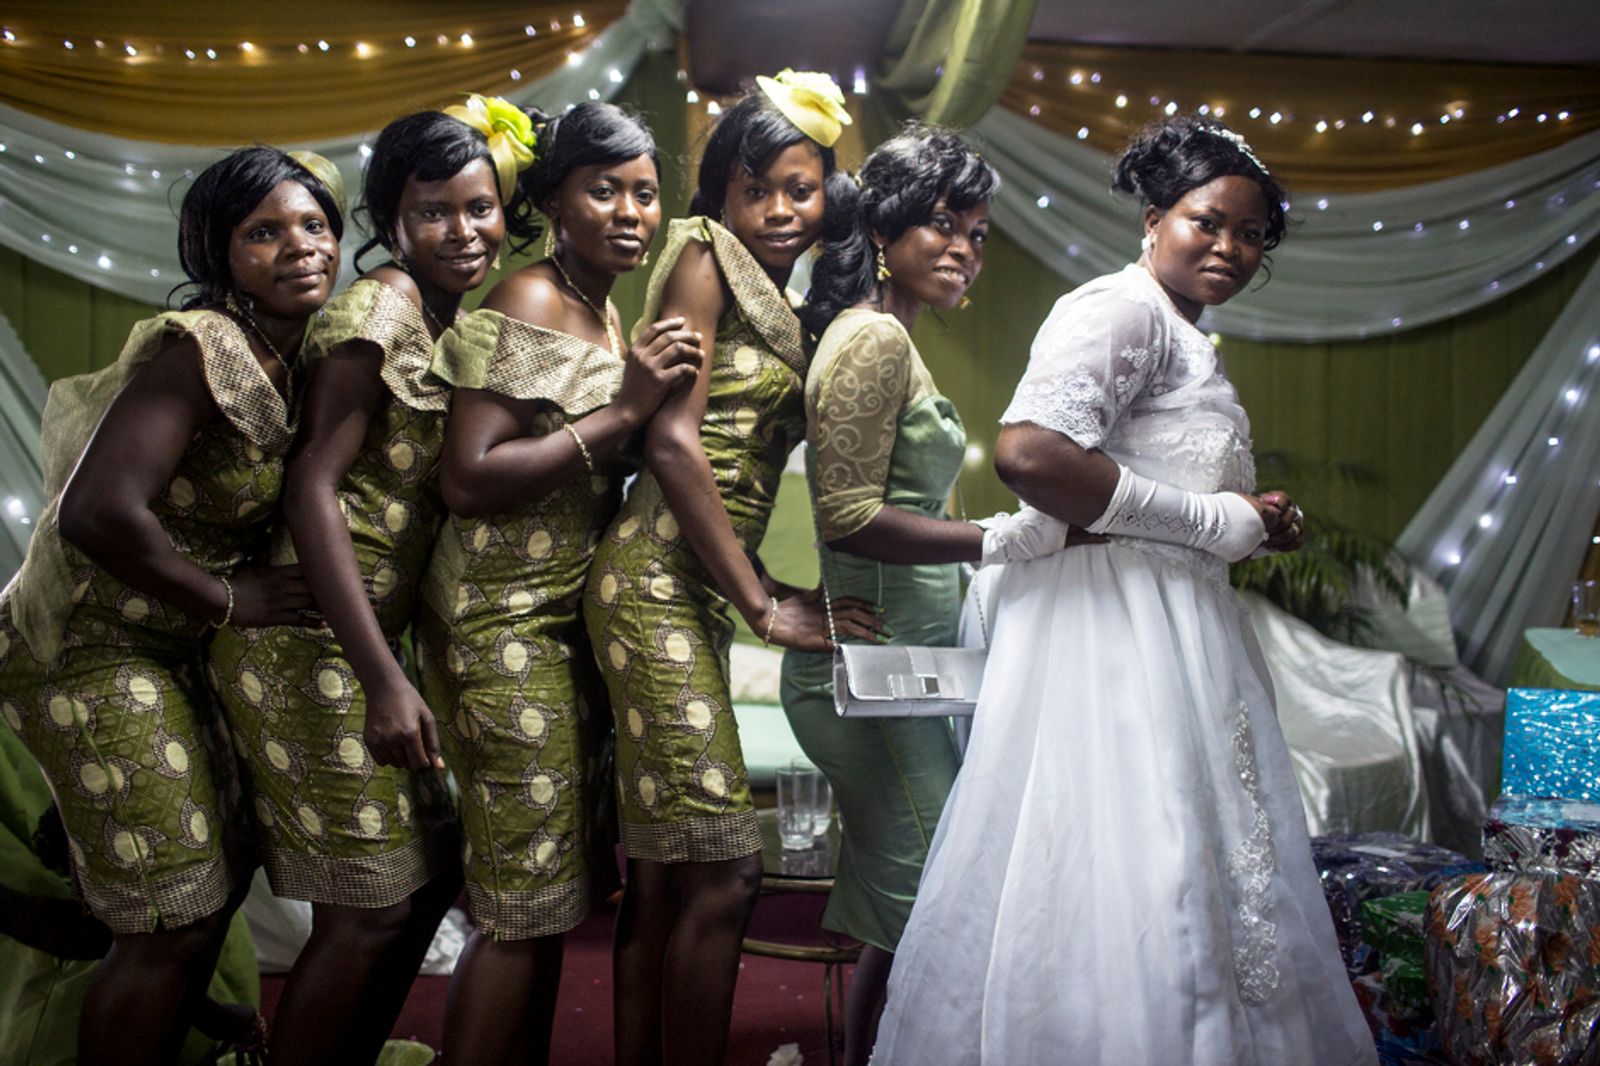 © Glenna Gordon - Image from the Naira Wedding: Marriage and Money in Nigeria  photography project